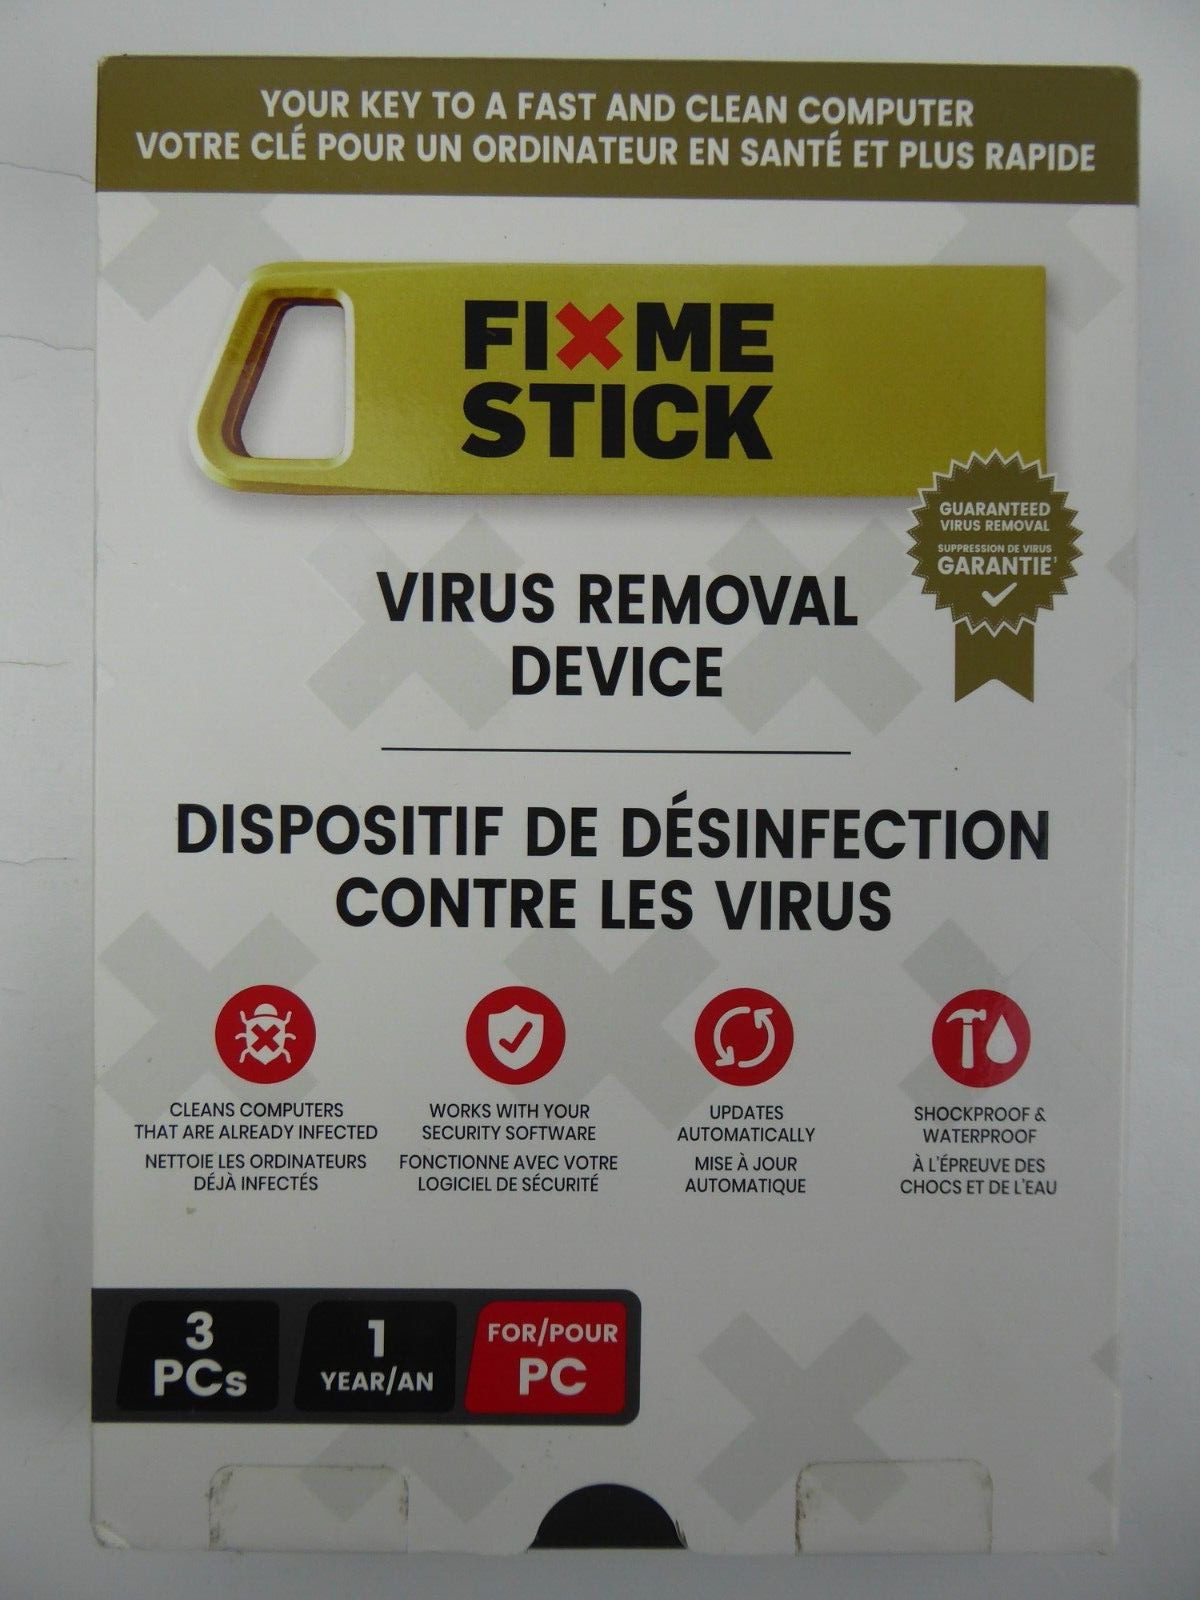 FixMeStick Gold Virus Removal Stick for Windows PCs - Use On Up To 3 PCs New